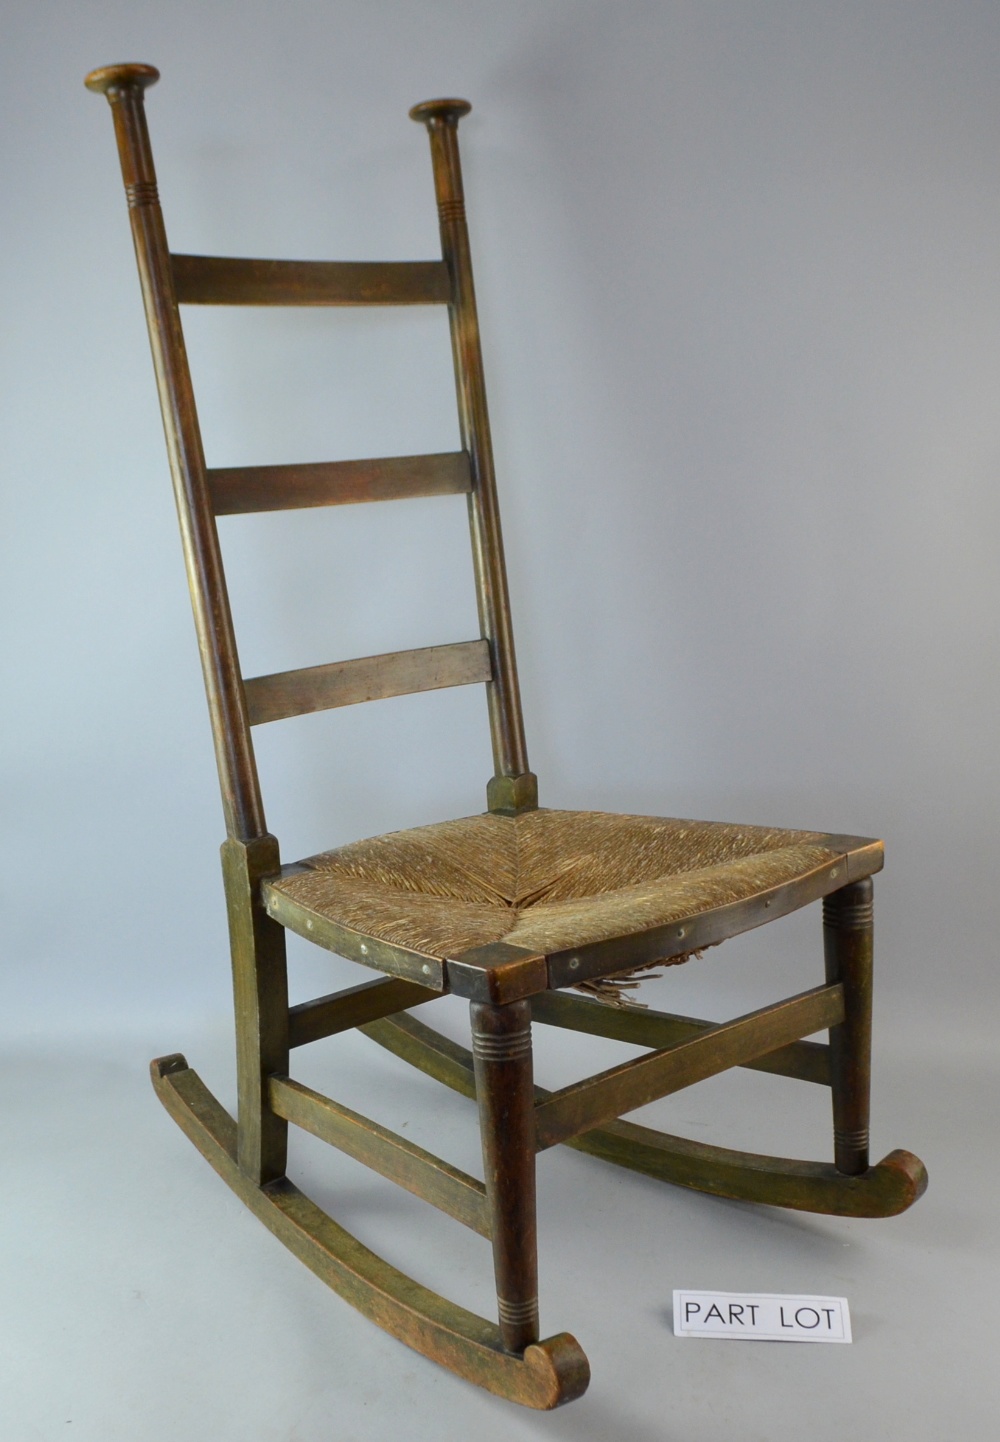 Voysey chair with rush seat and fixed Liberty's label and another chair..